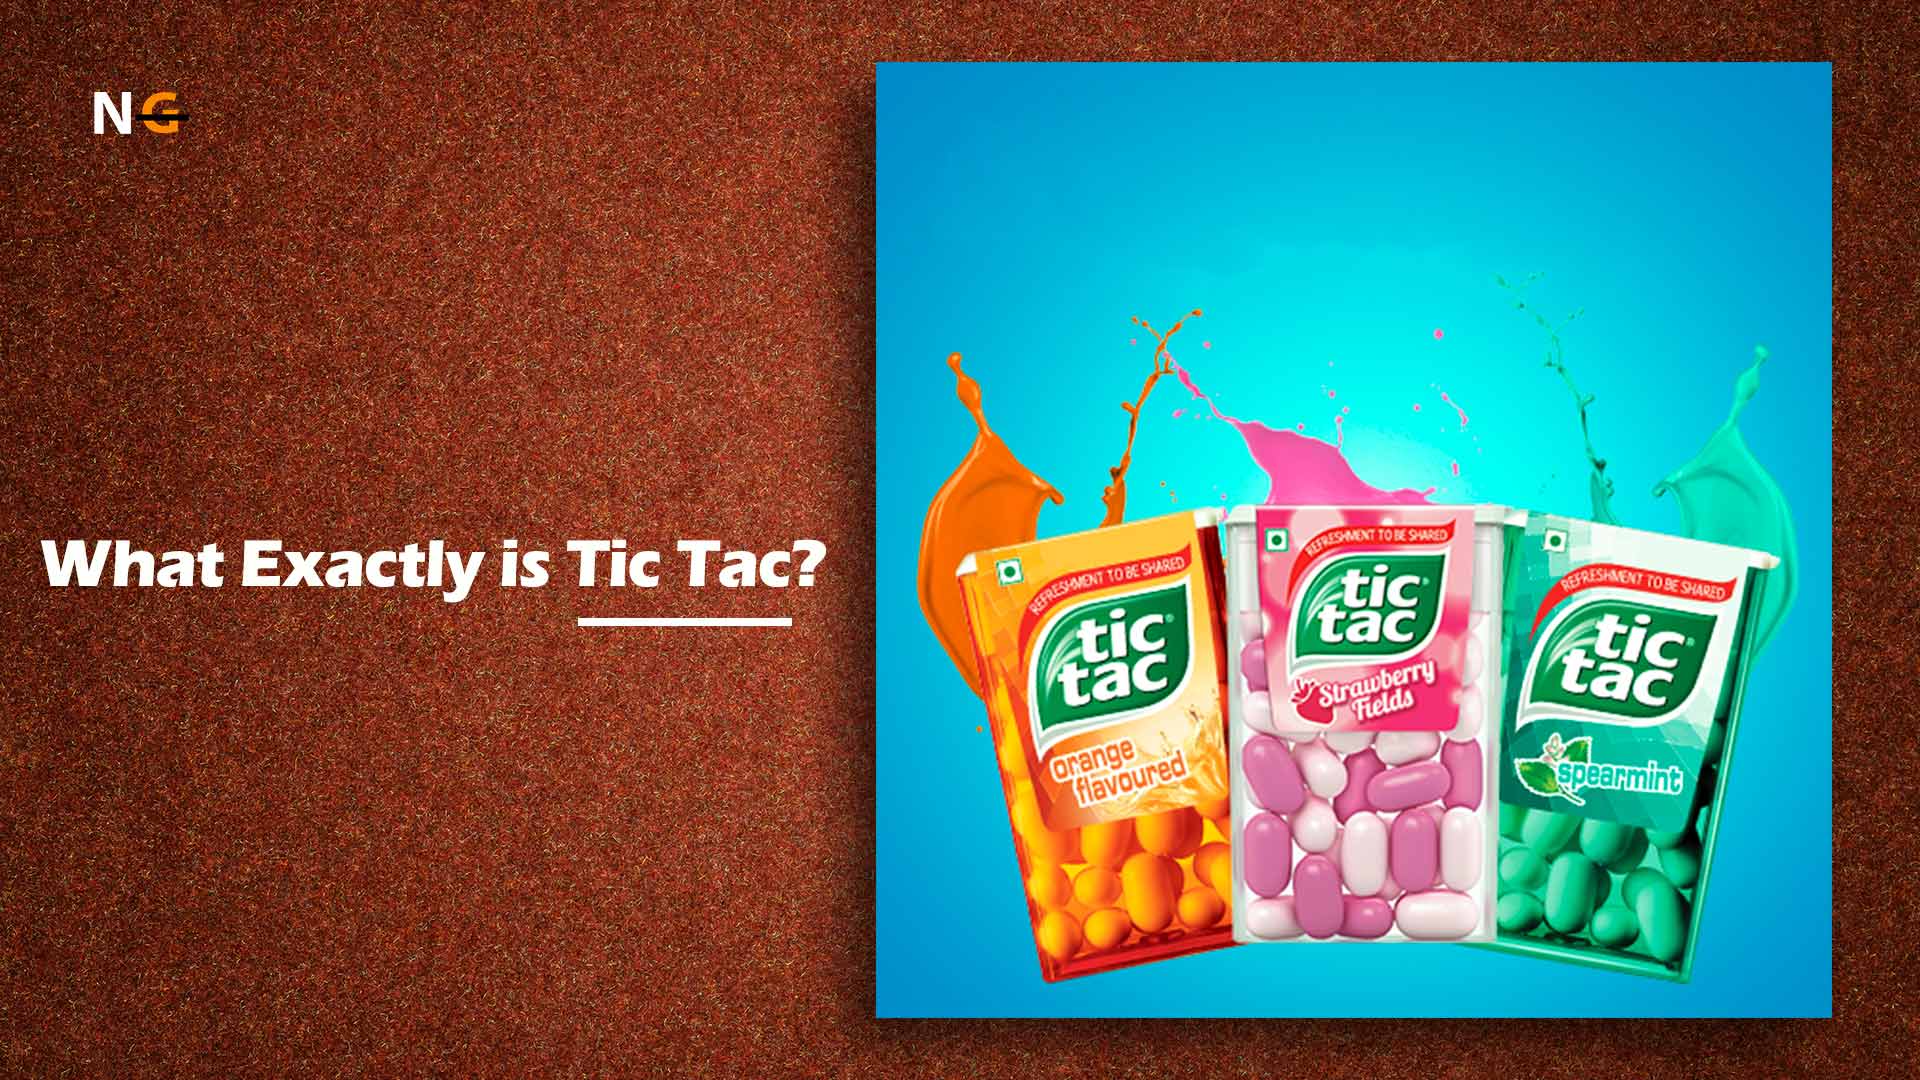 What Exactly is Tic Tac